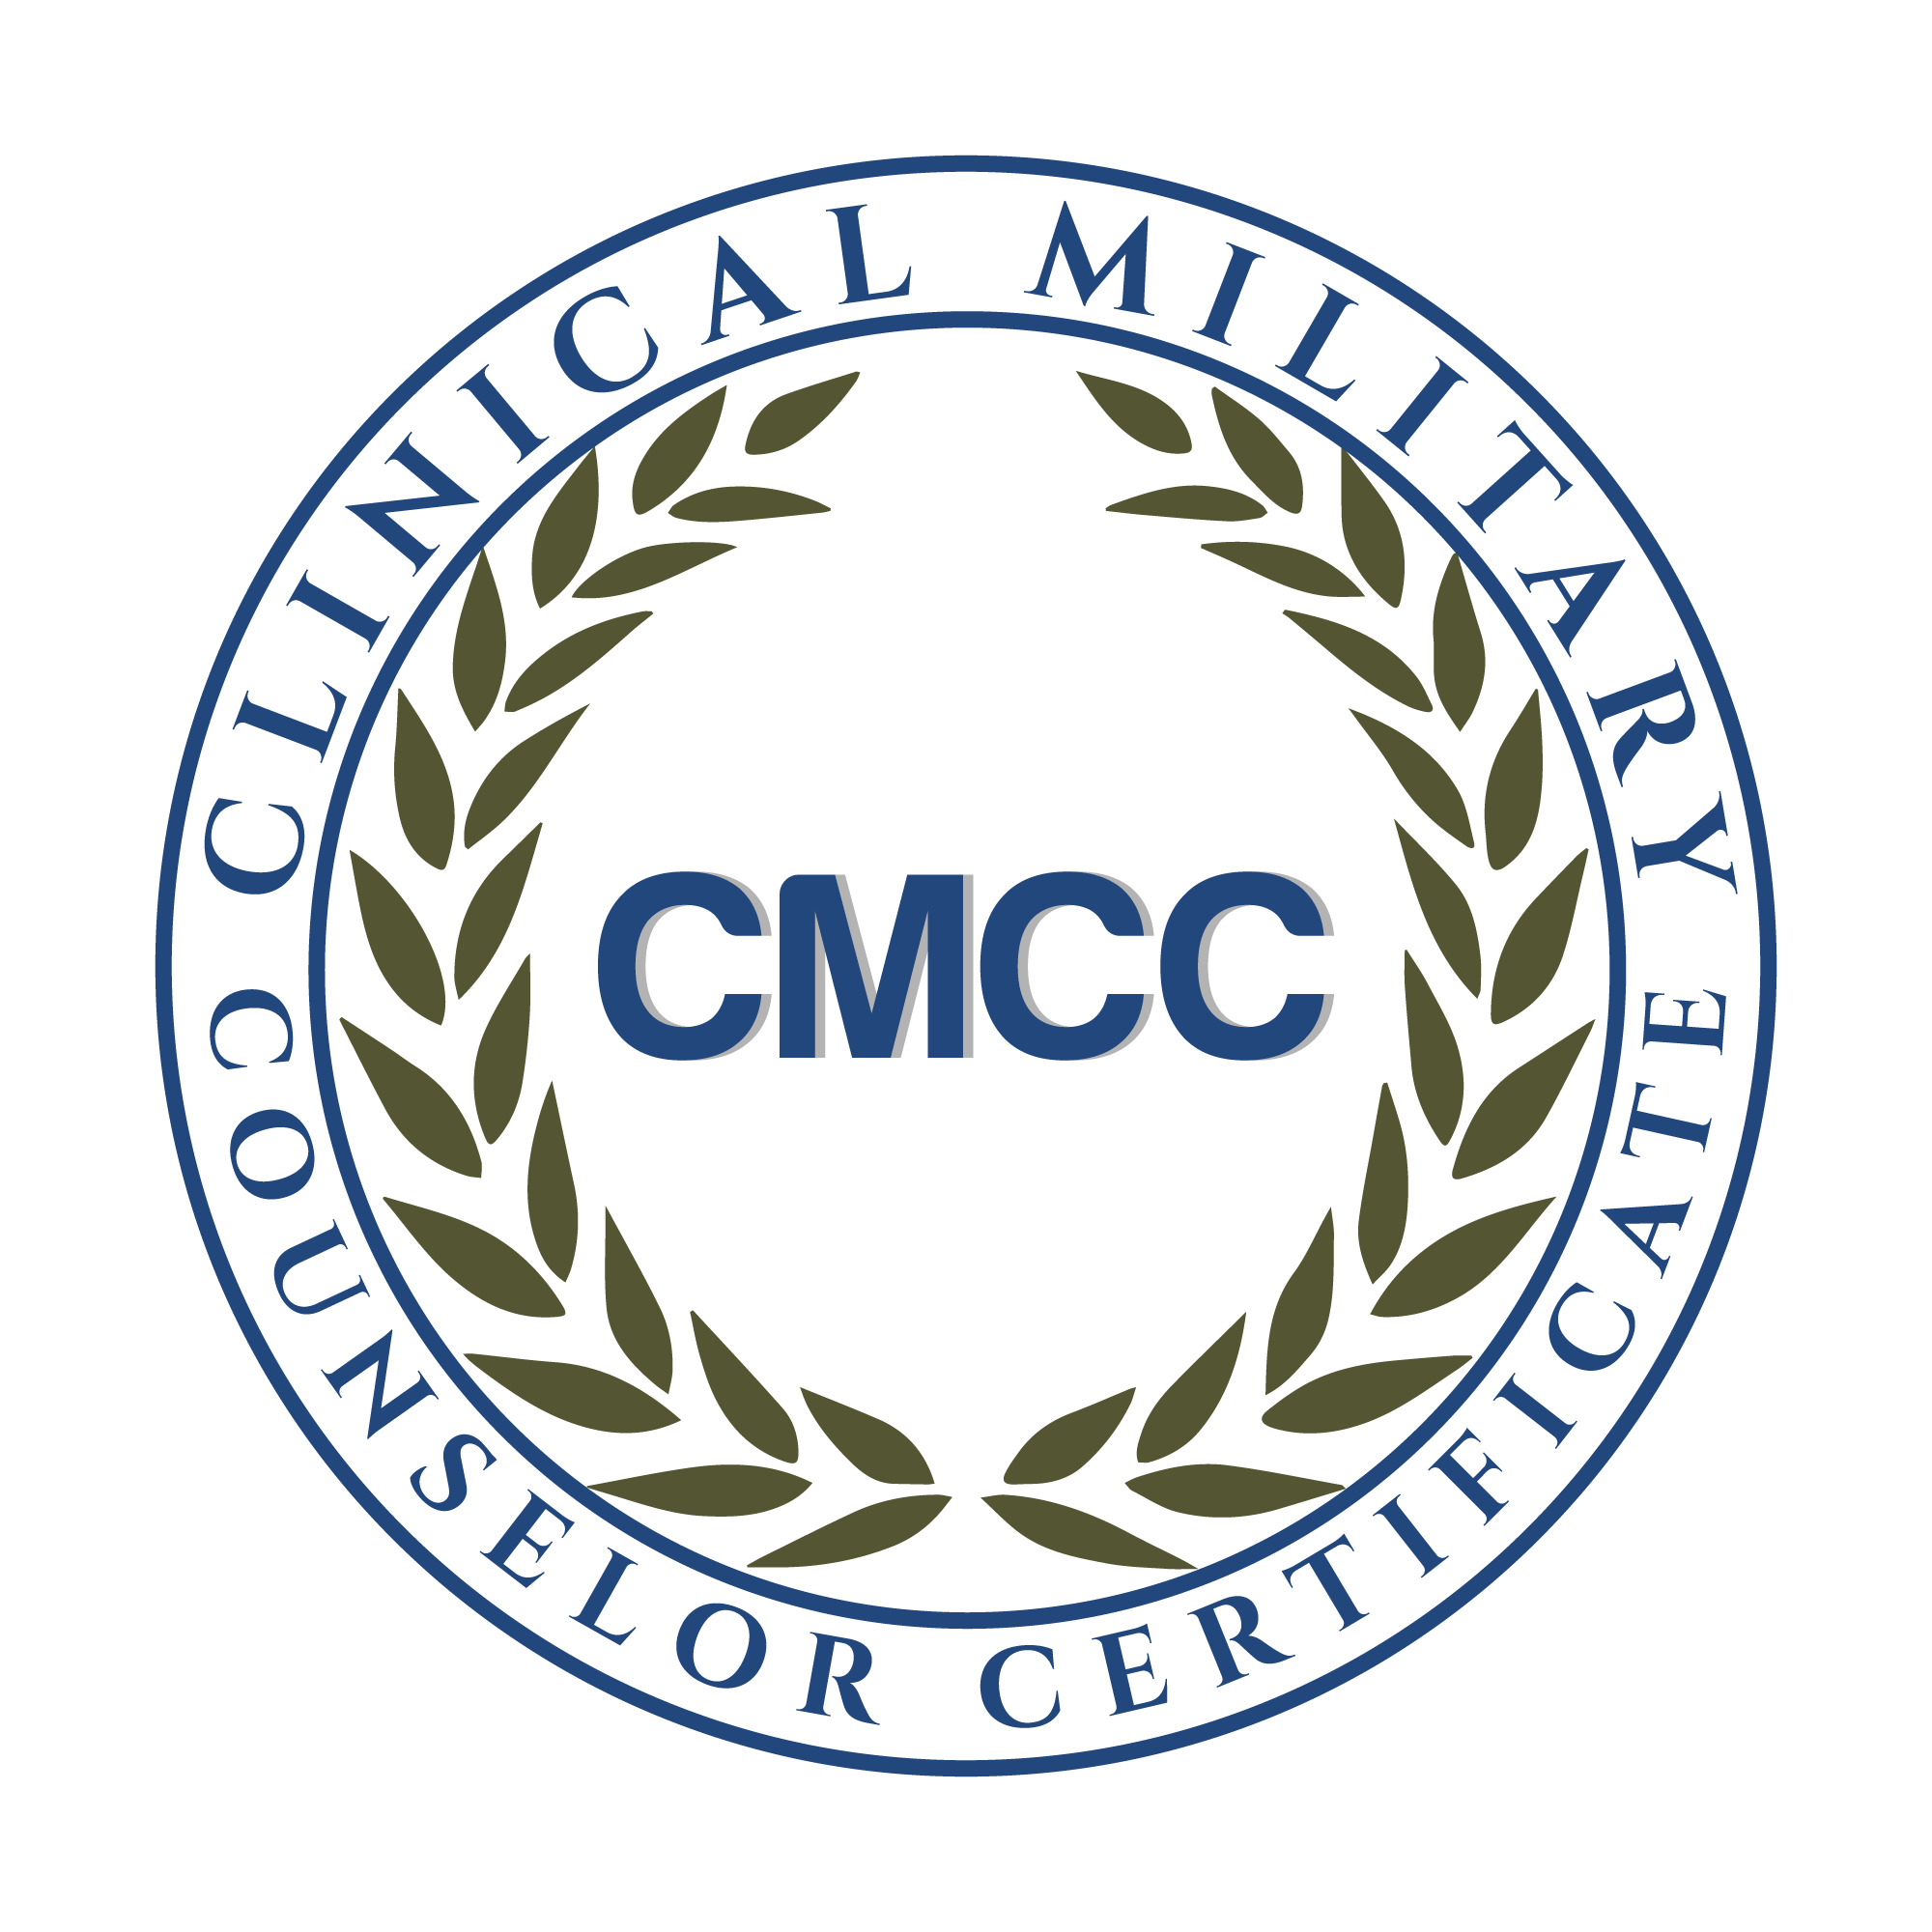 CMCC Logo - Military Counseling Training Military Counselor